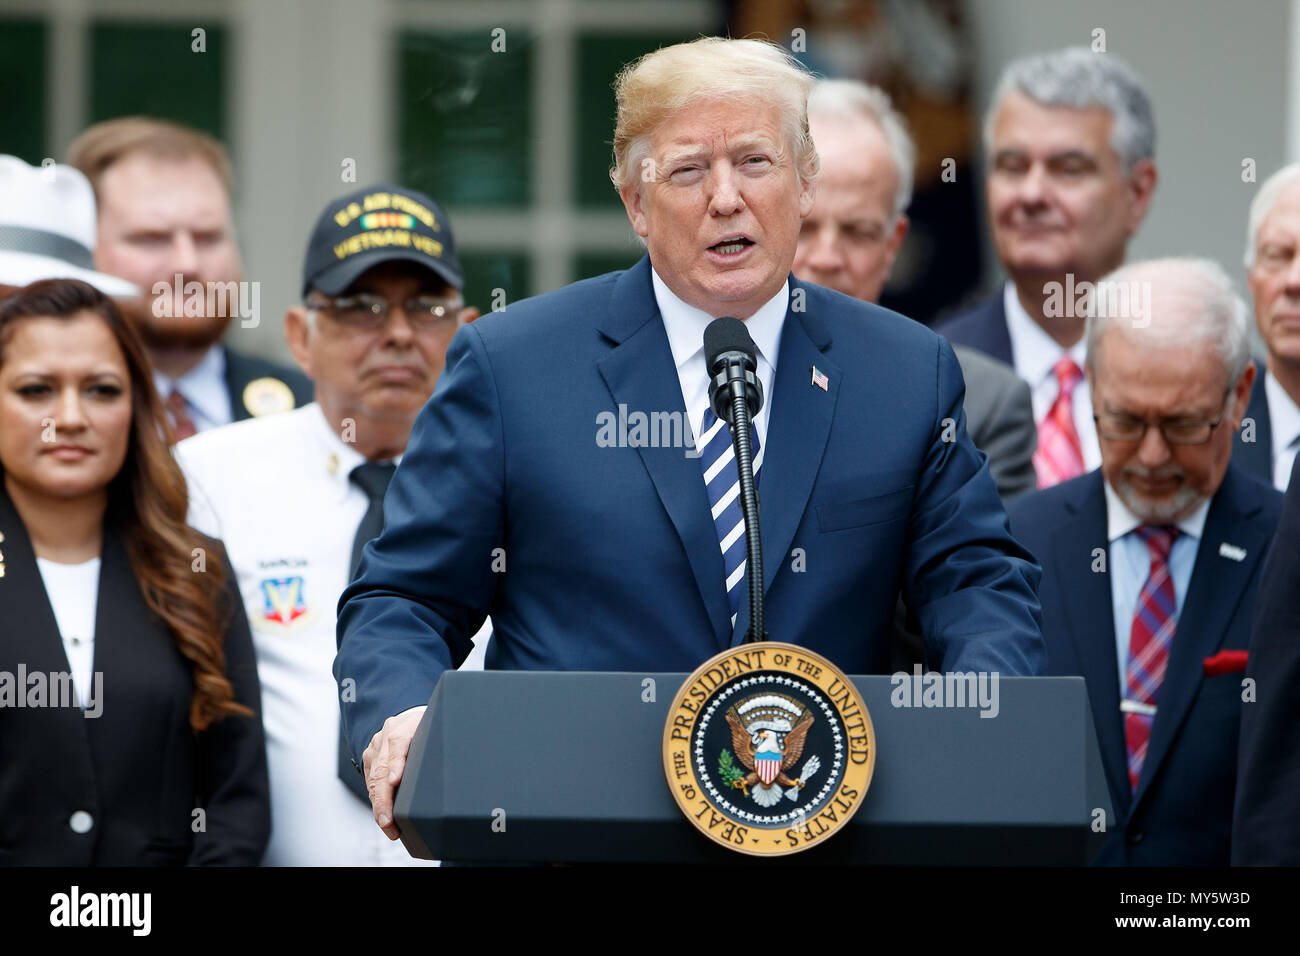 Washington, USA. 6th June, 2018. U.S. President Donald Trump (Front) speaks during a bill signing ceremony for the 'VA Mission Act of 2018' in the Rose Garden of the White House in Washington, DC, the United States, on June 6, 2018. Credit: Ting Shen/Xinhua/Alamy Live News Stock Photo